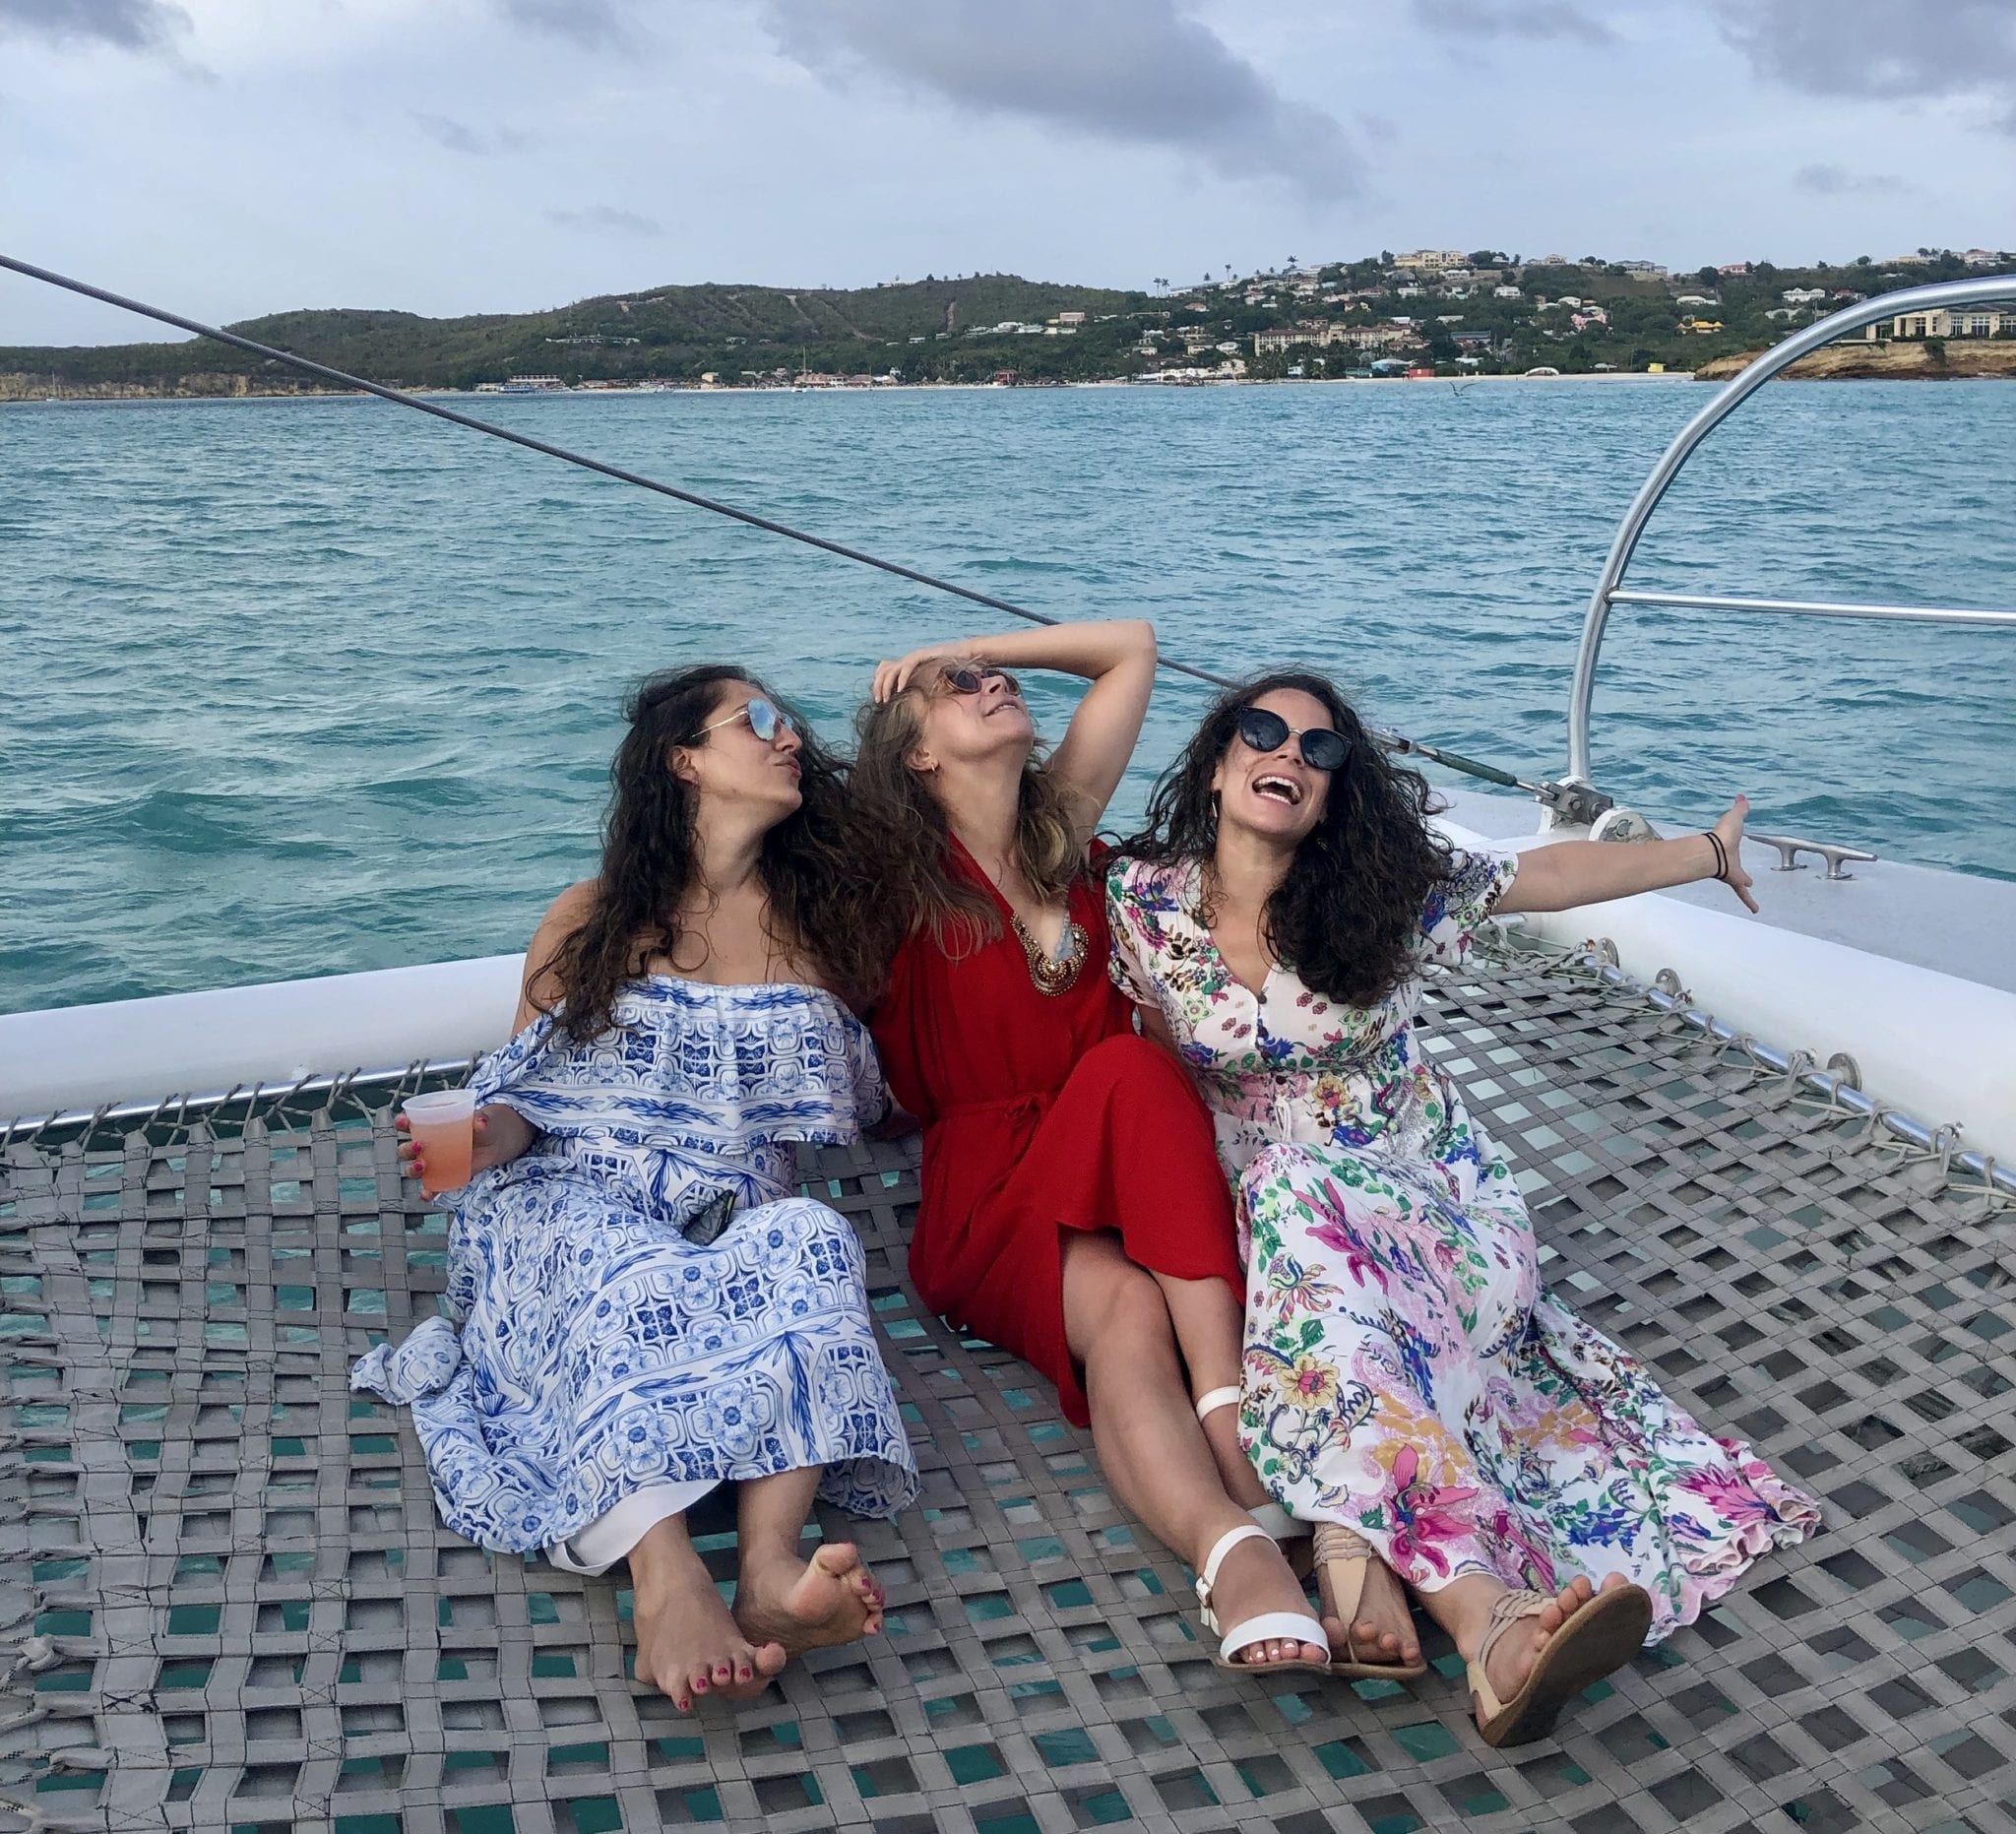 Three girls in floral patterned dresses sitting on the net of the catamaran, looking off to the side and making goofy kissy faces.